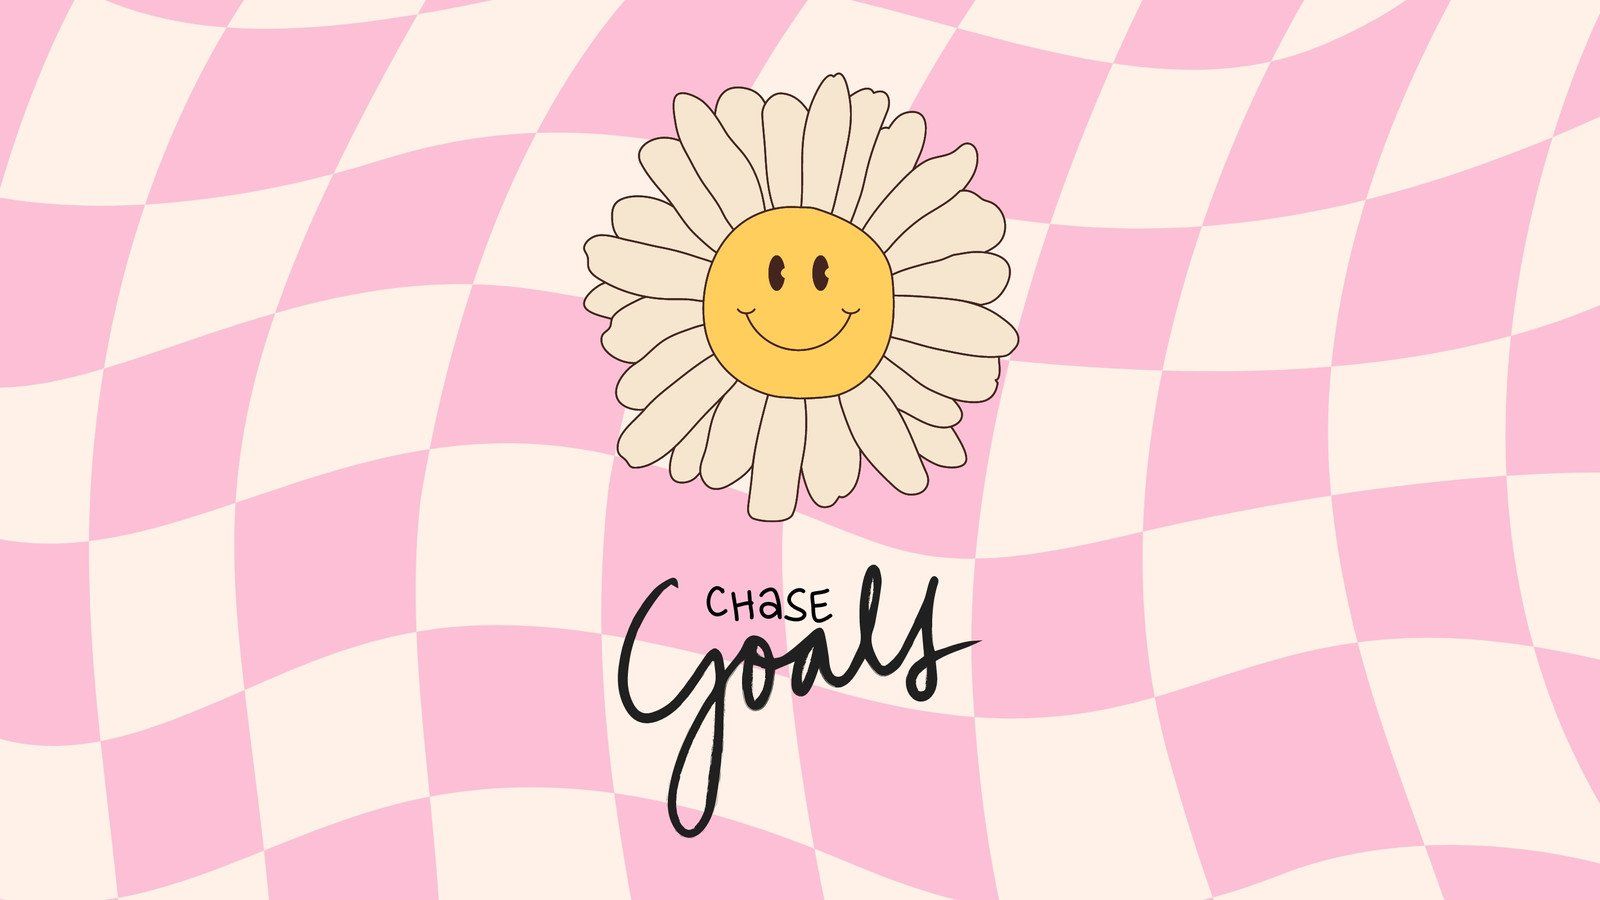 A happy daisy on a pink and white checkered background with the words 